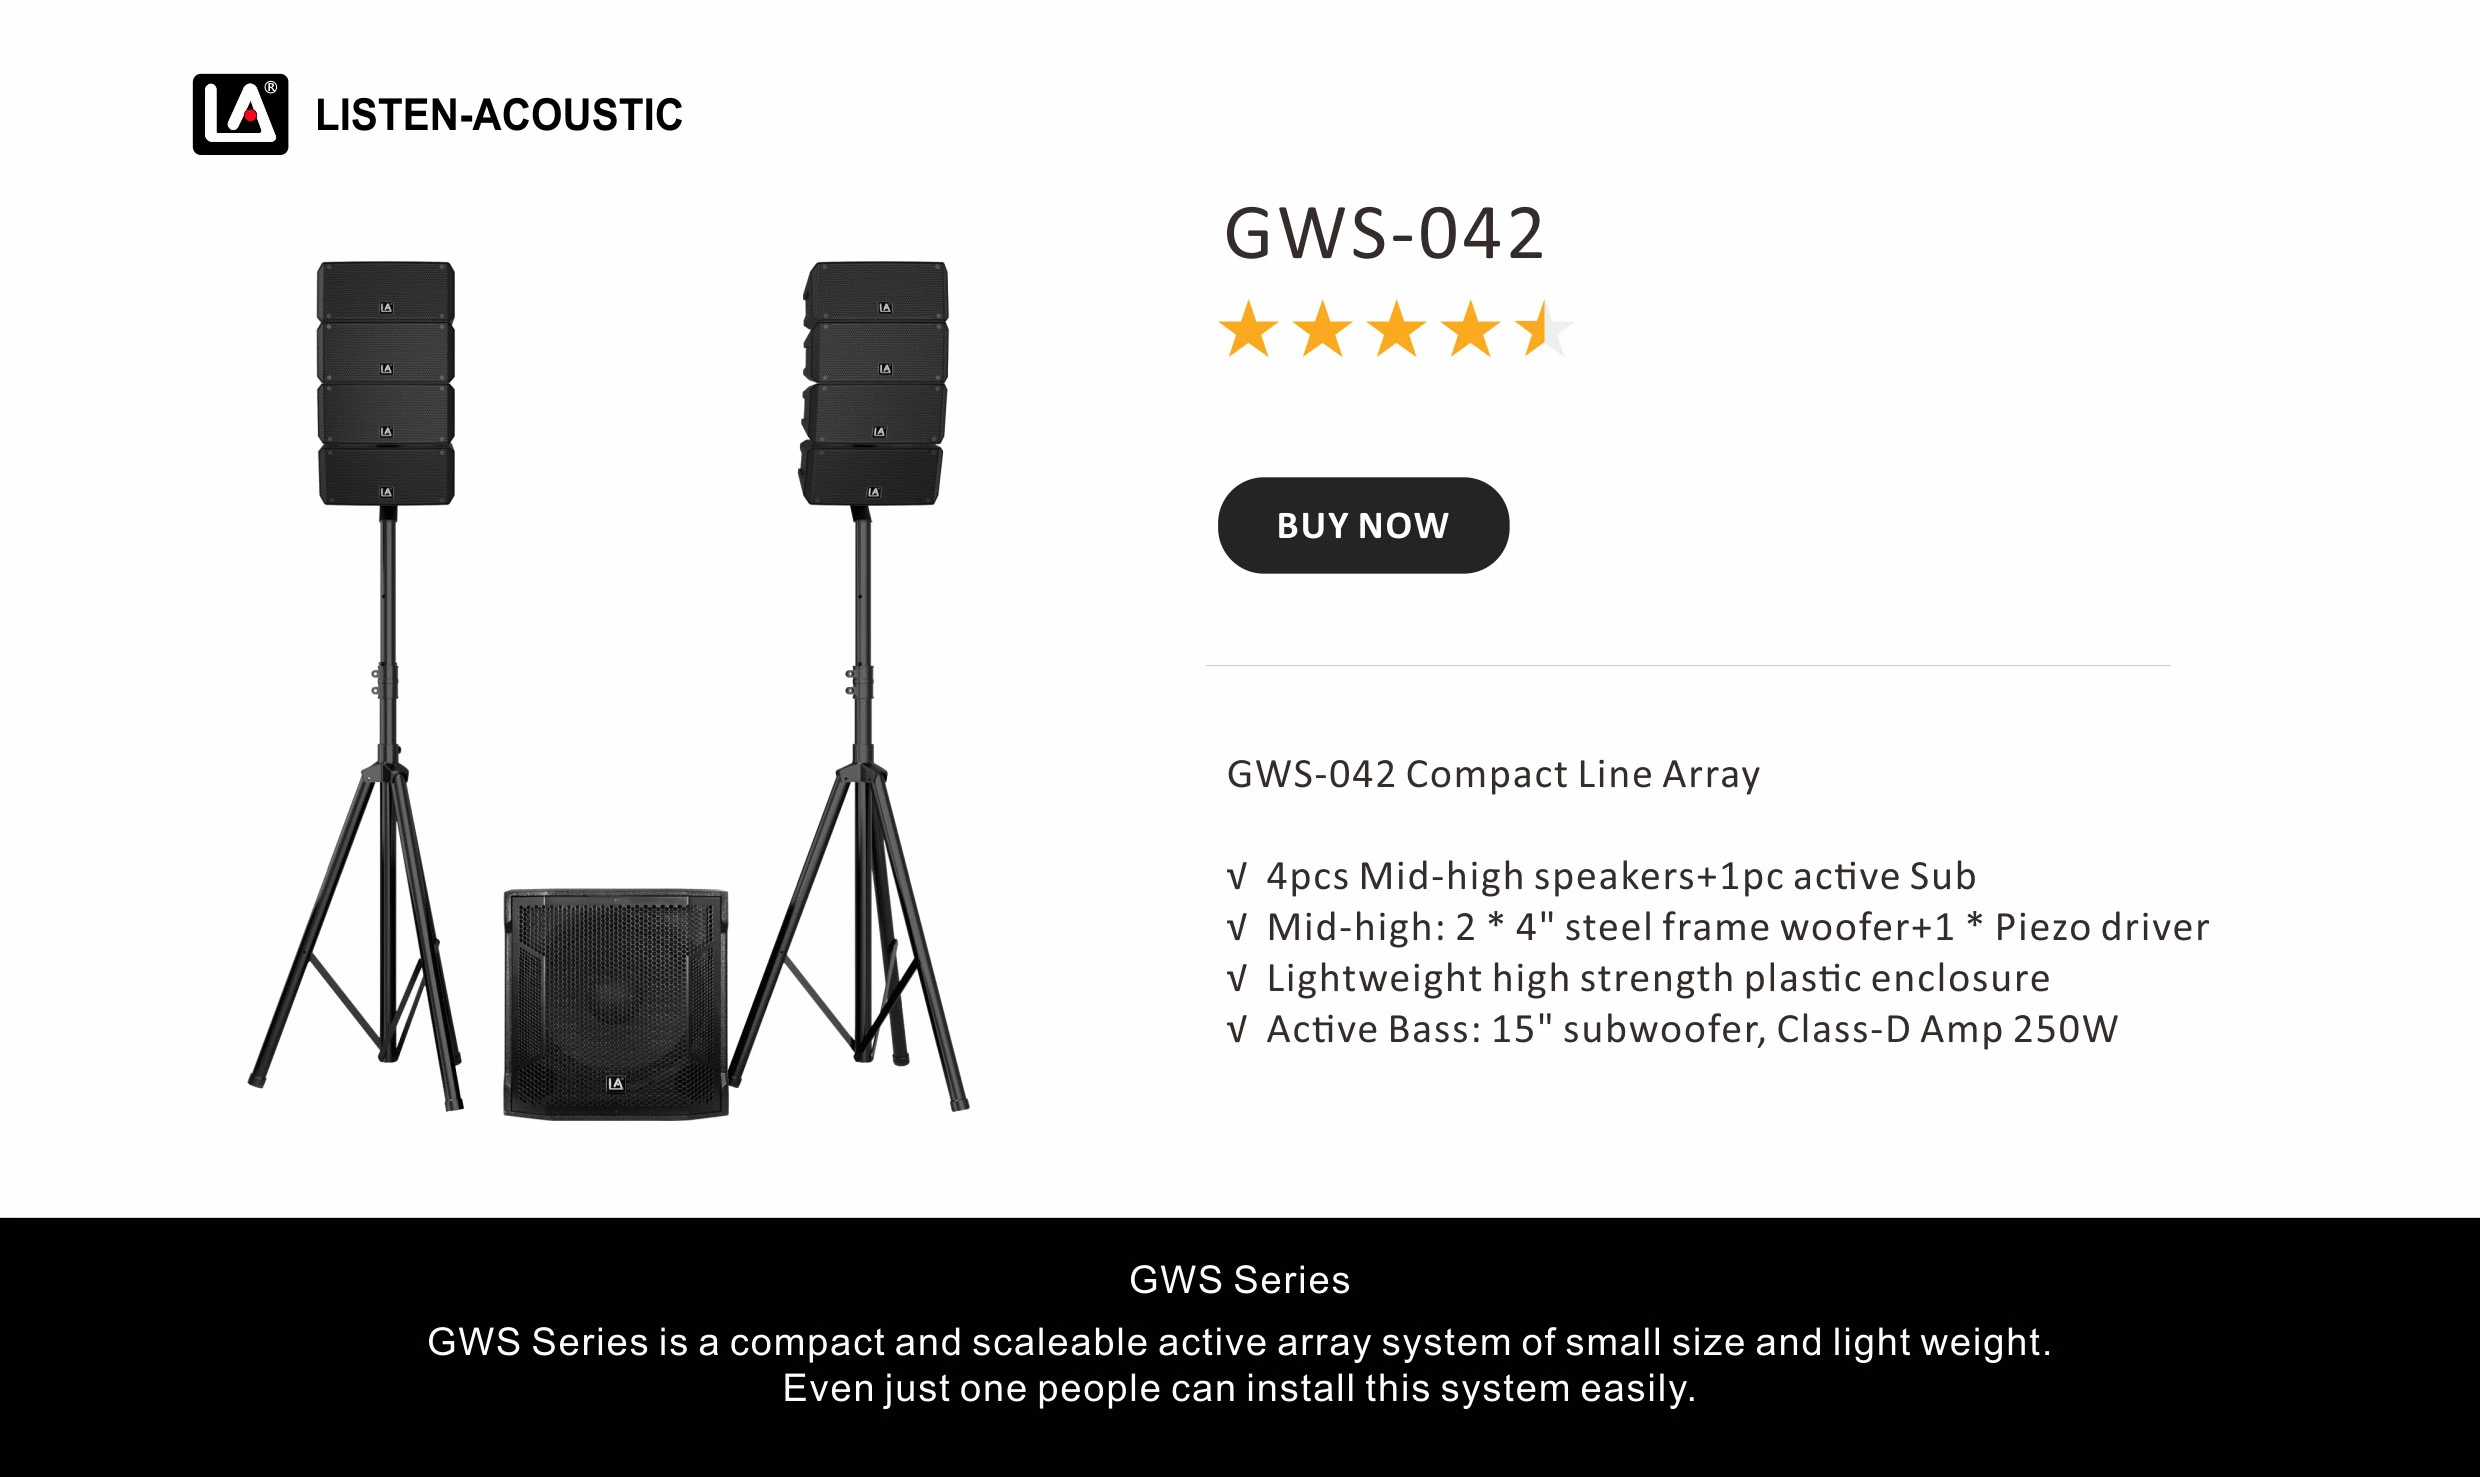 compact line array systems,compact line array system,array compact,ultra compact line array